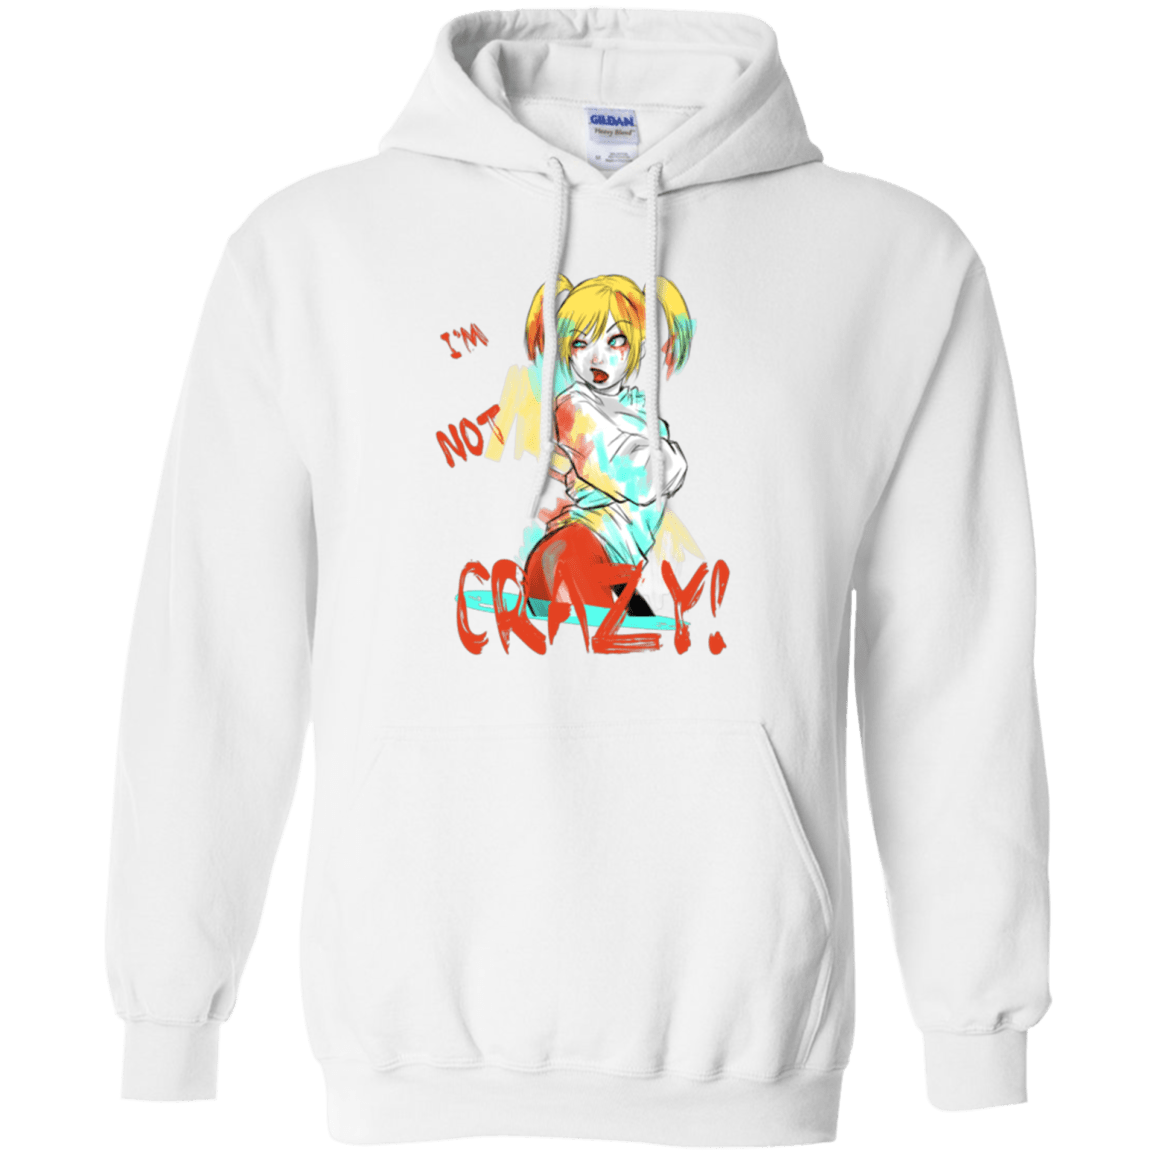 Sweatshirts White / Small I'm not crazy! Pullover Hoodie